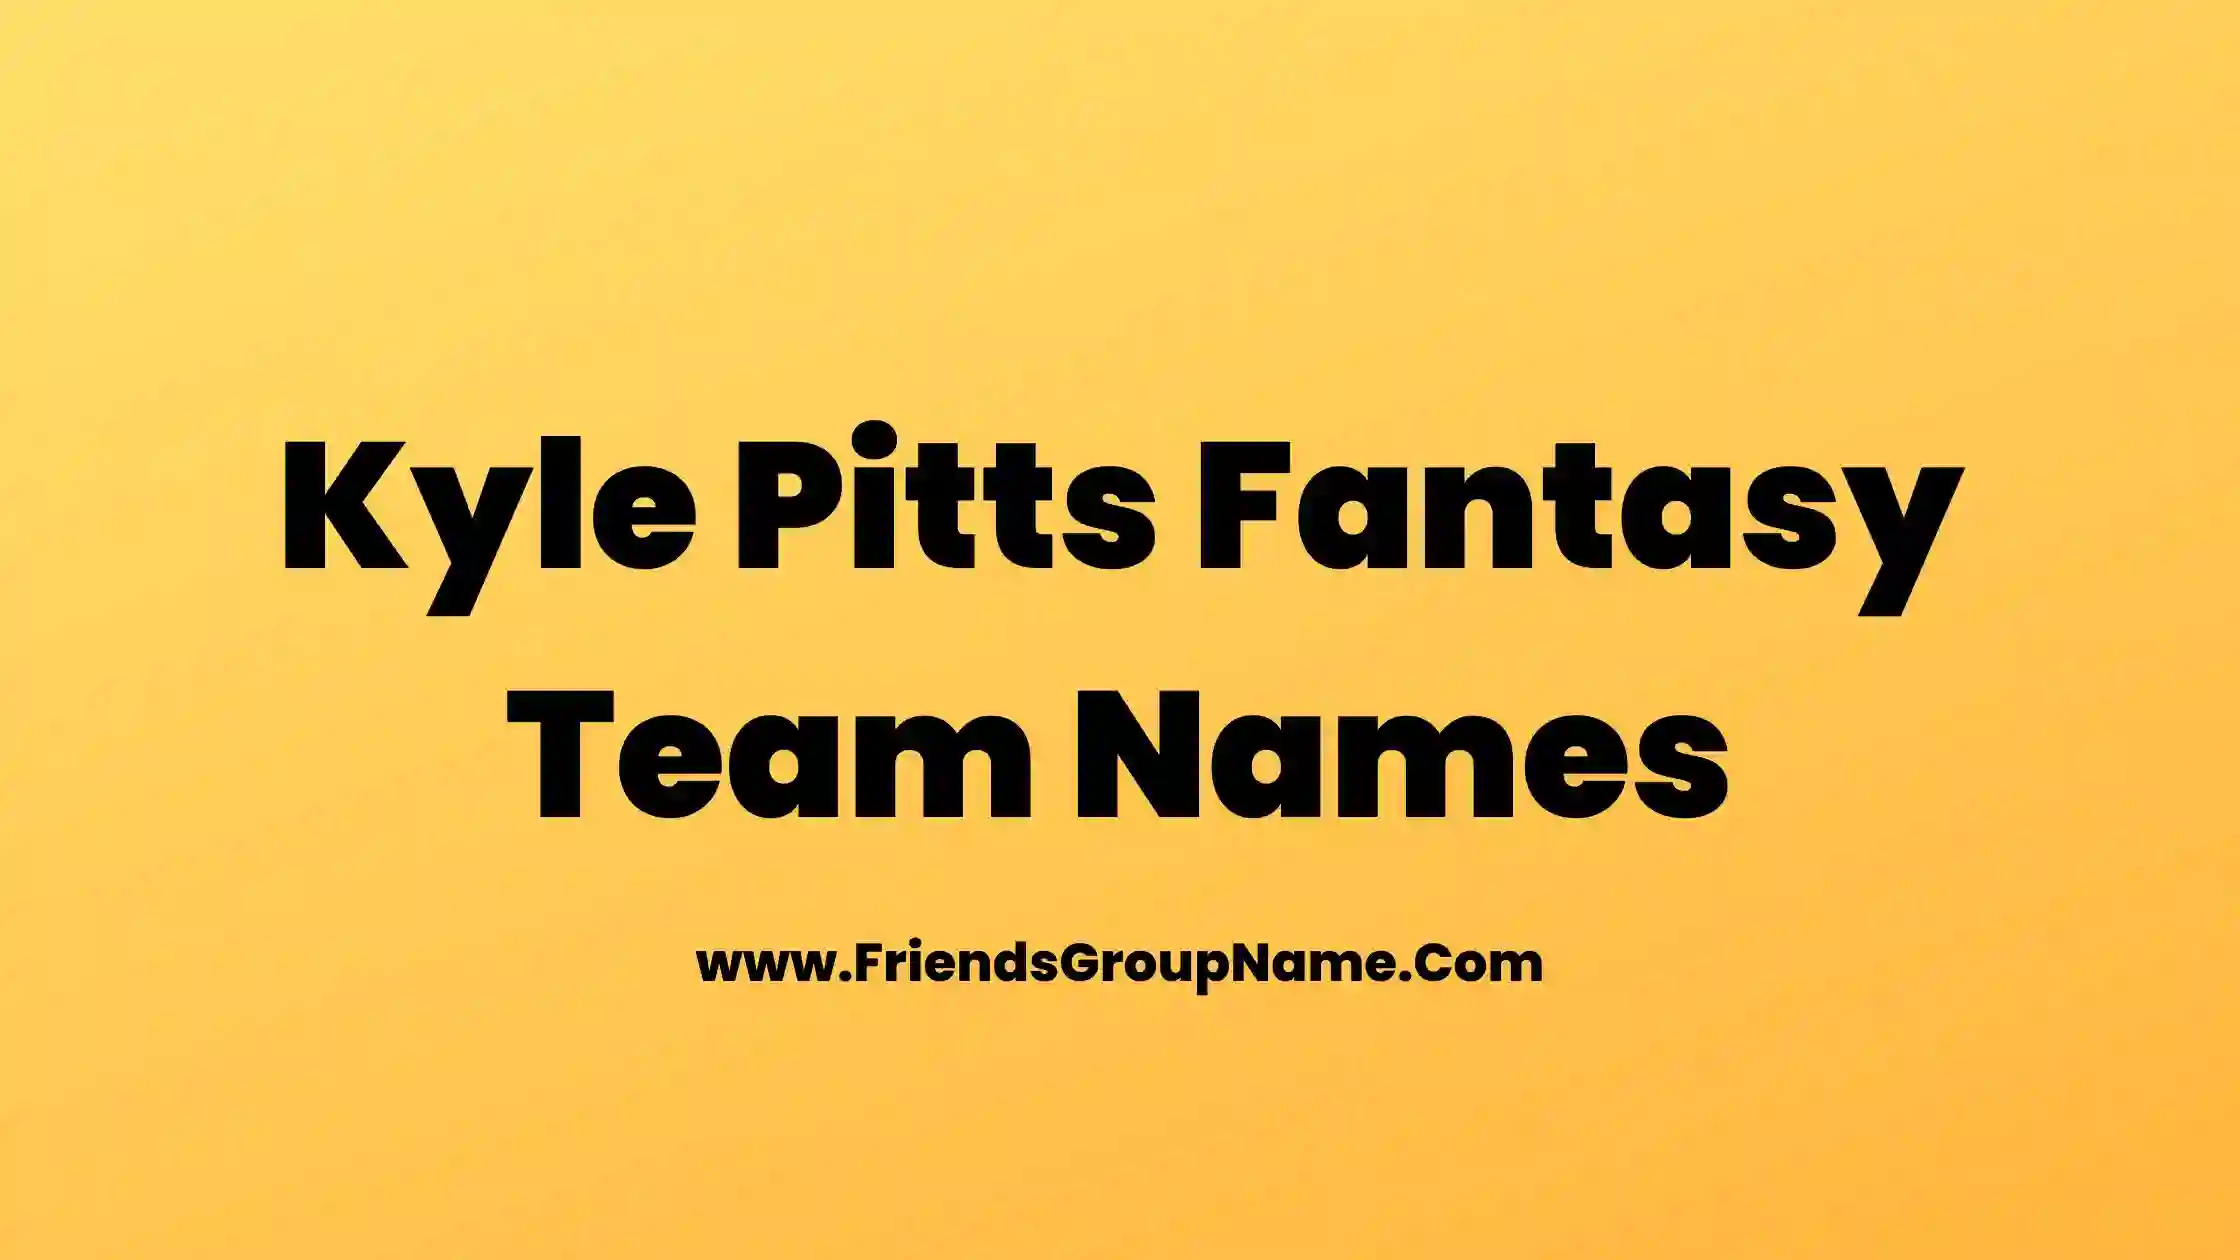 Kyle Pitts Fantasy Team Names